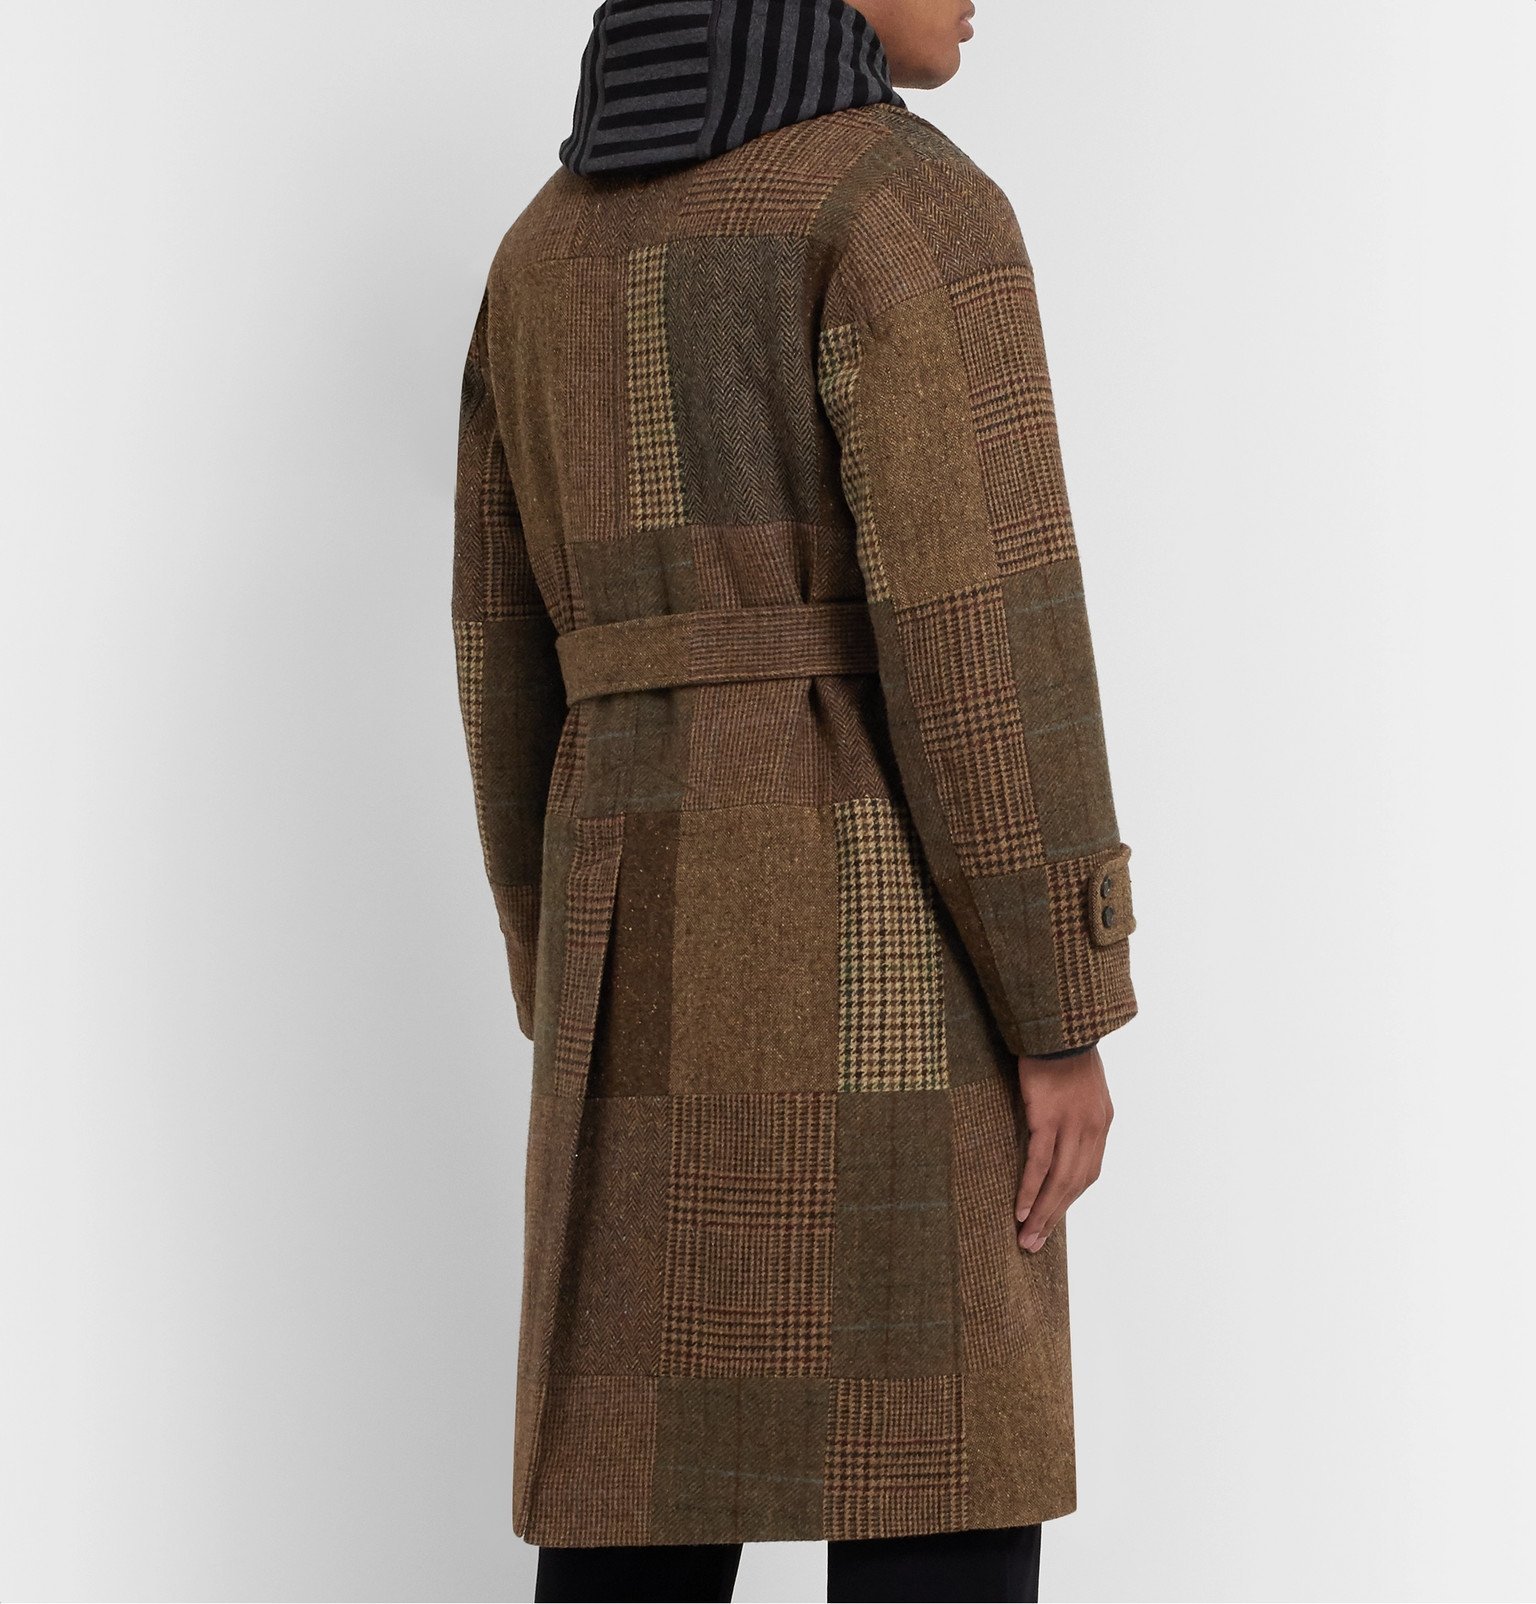 Noah - Patchwork Double-Breasted Wool Trench Coat - Brown Noah NYC